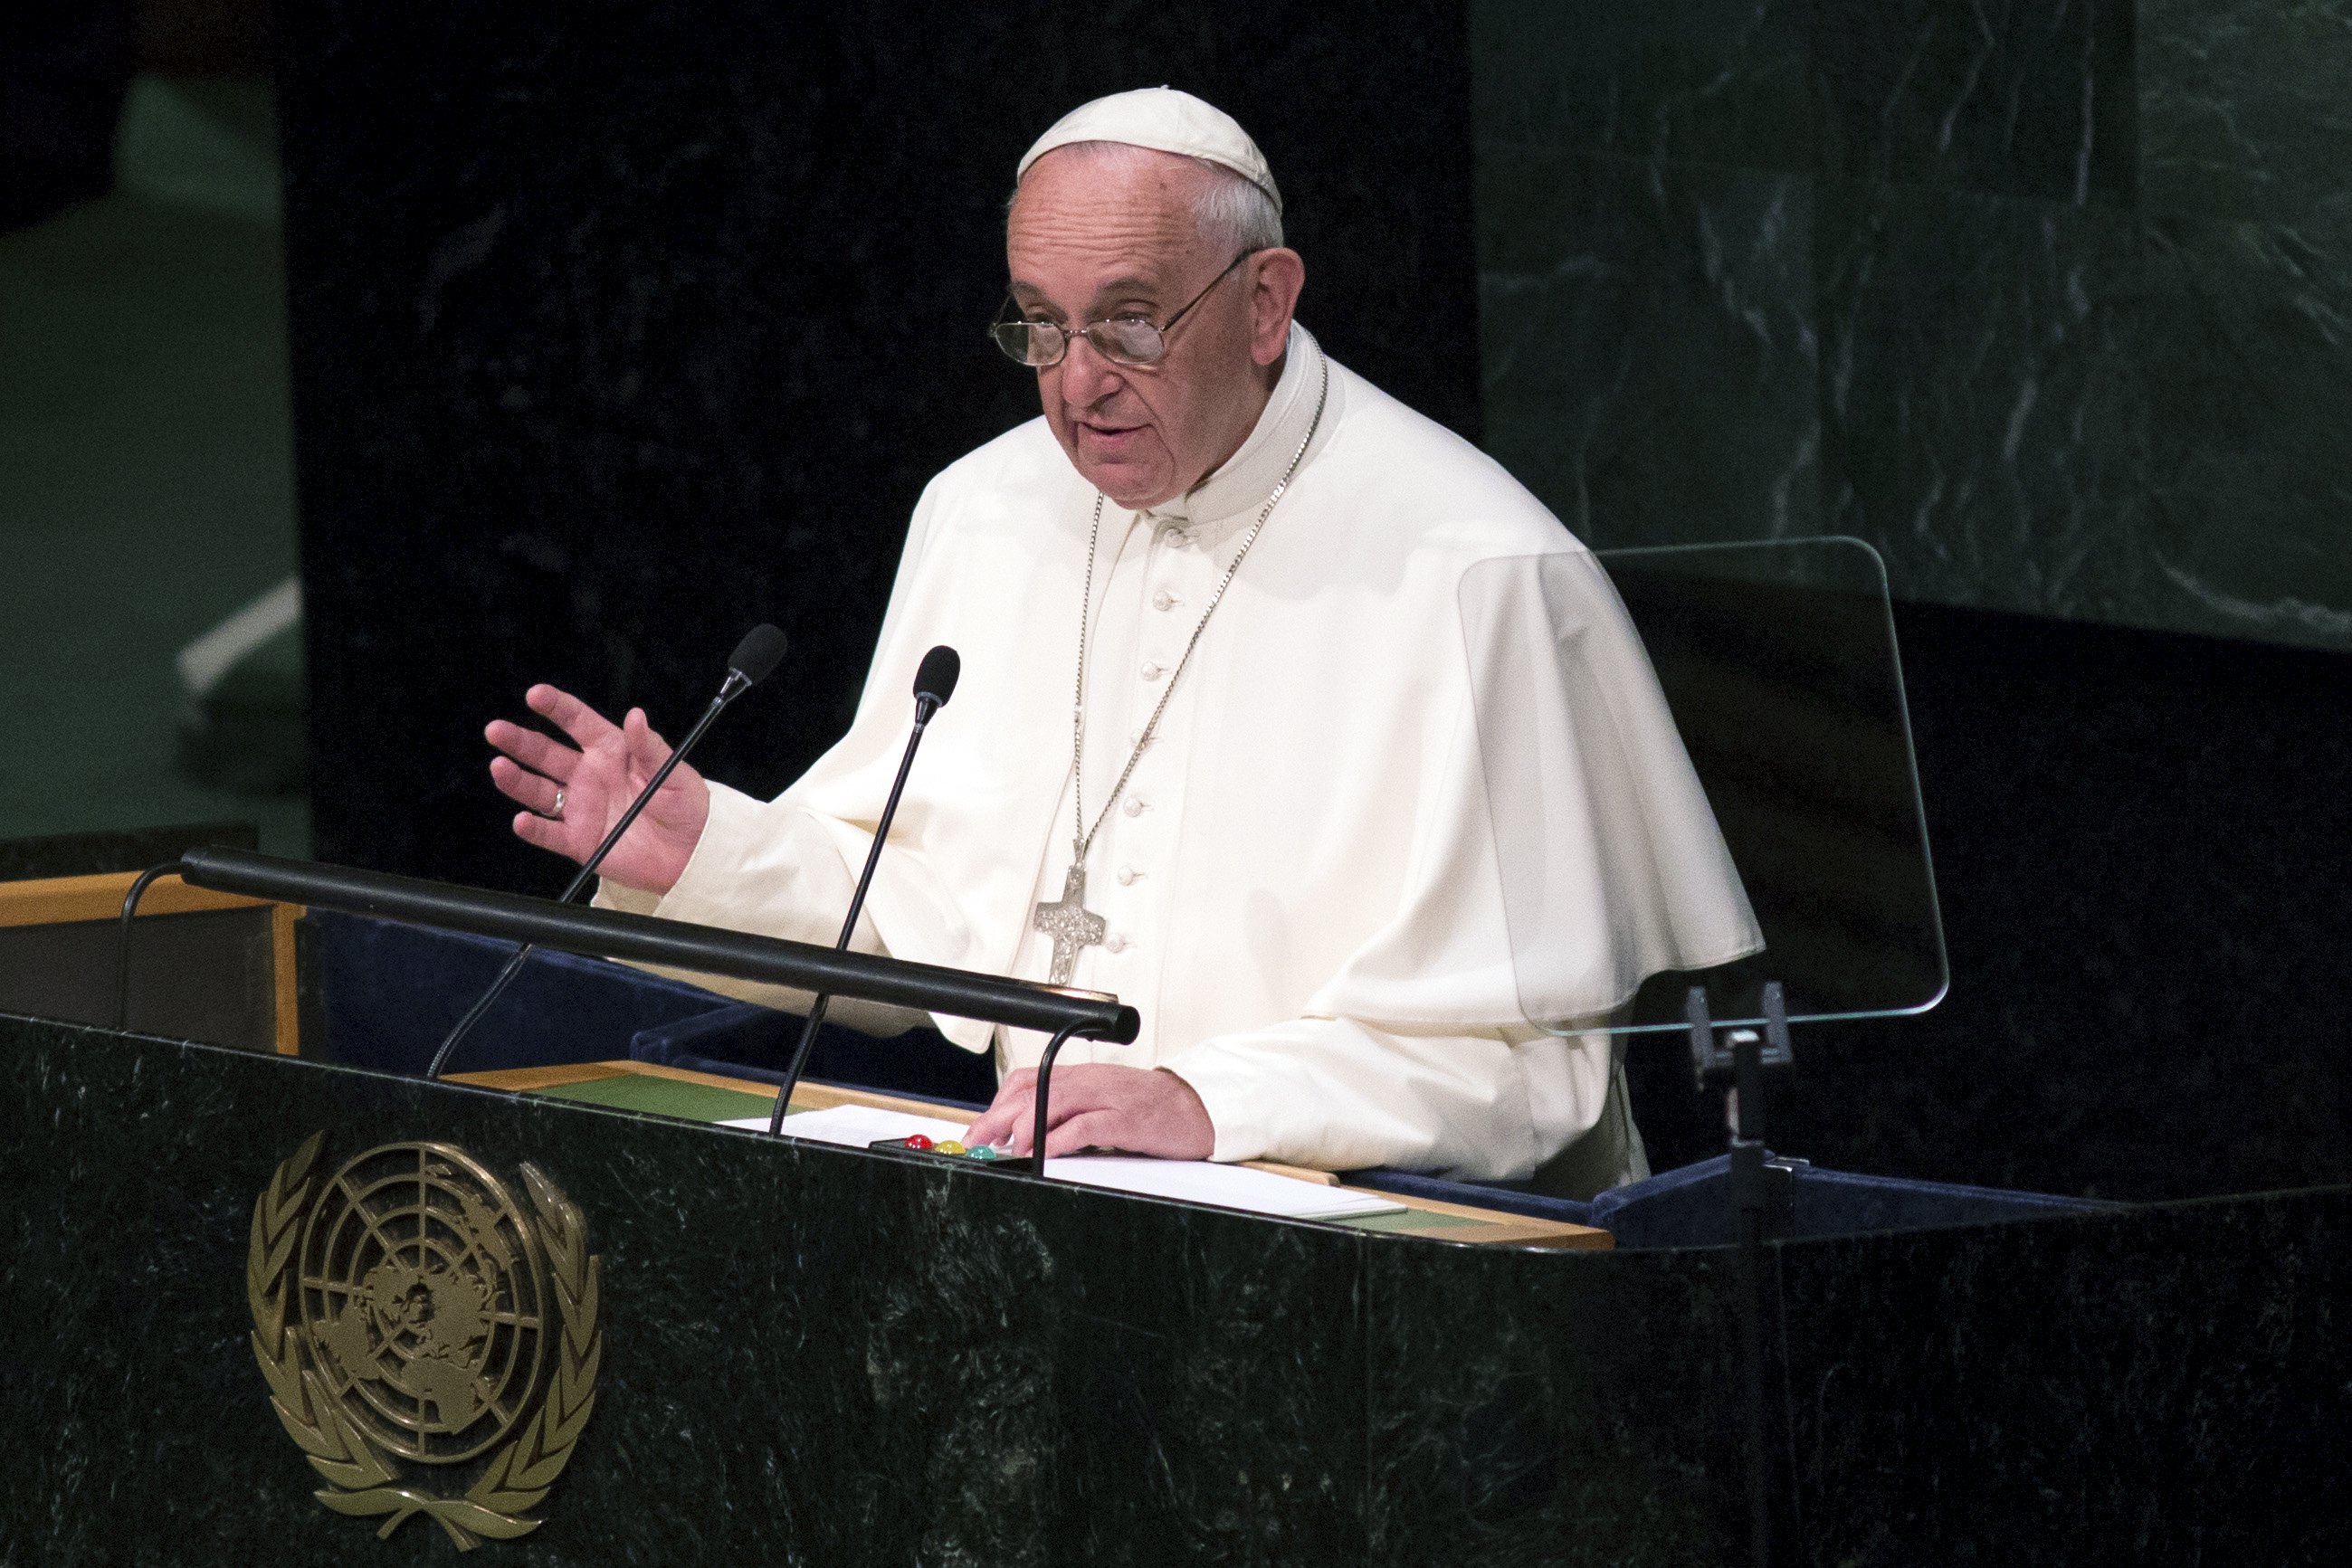 Pope Francis addresses attendees in the opening ceremony to commence a plenary meeting of the United Nations Sustainable Development Summit 2015 at the United Nations headquarters in Manhattan, New York September 25, 2015.